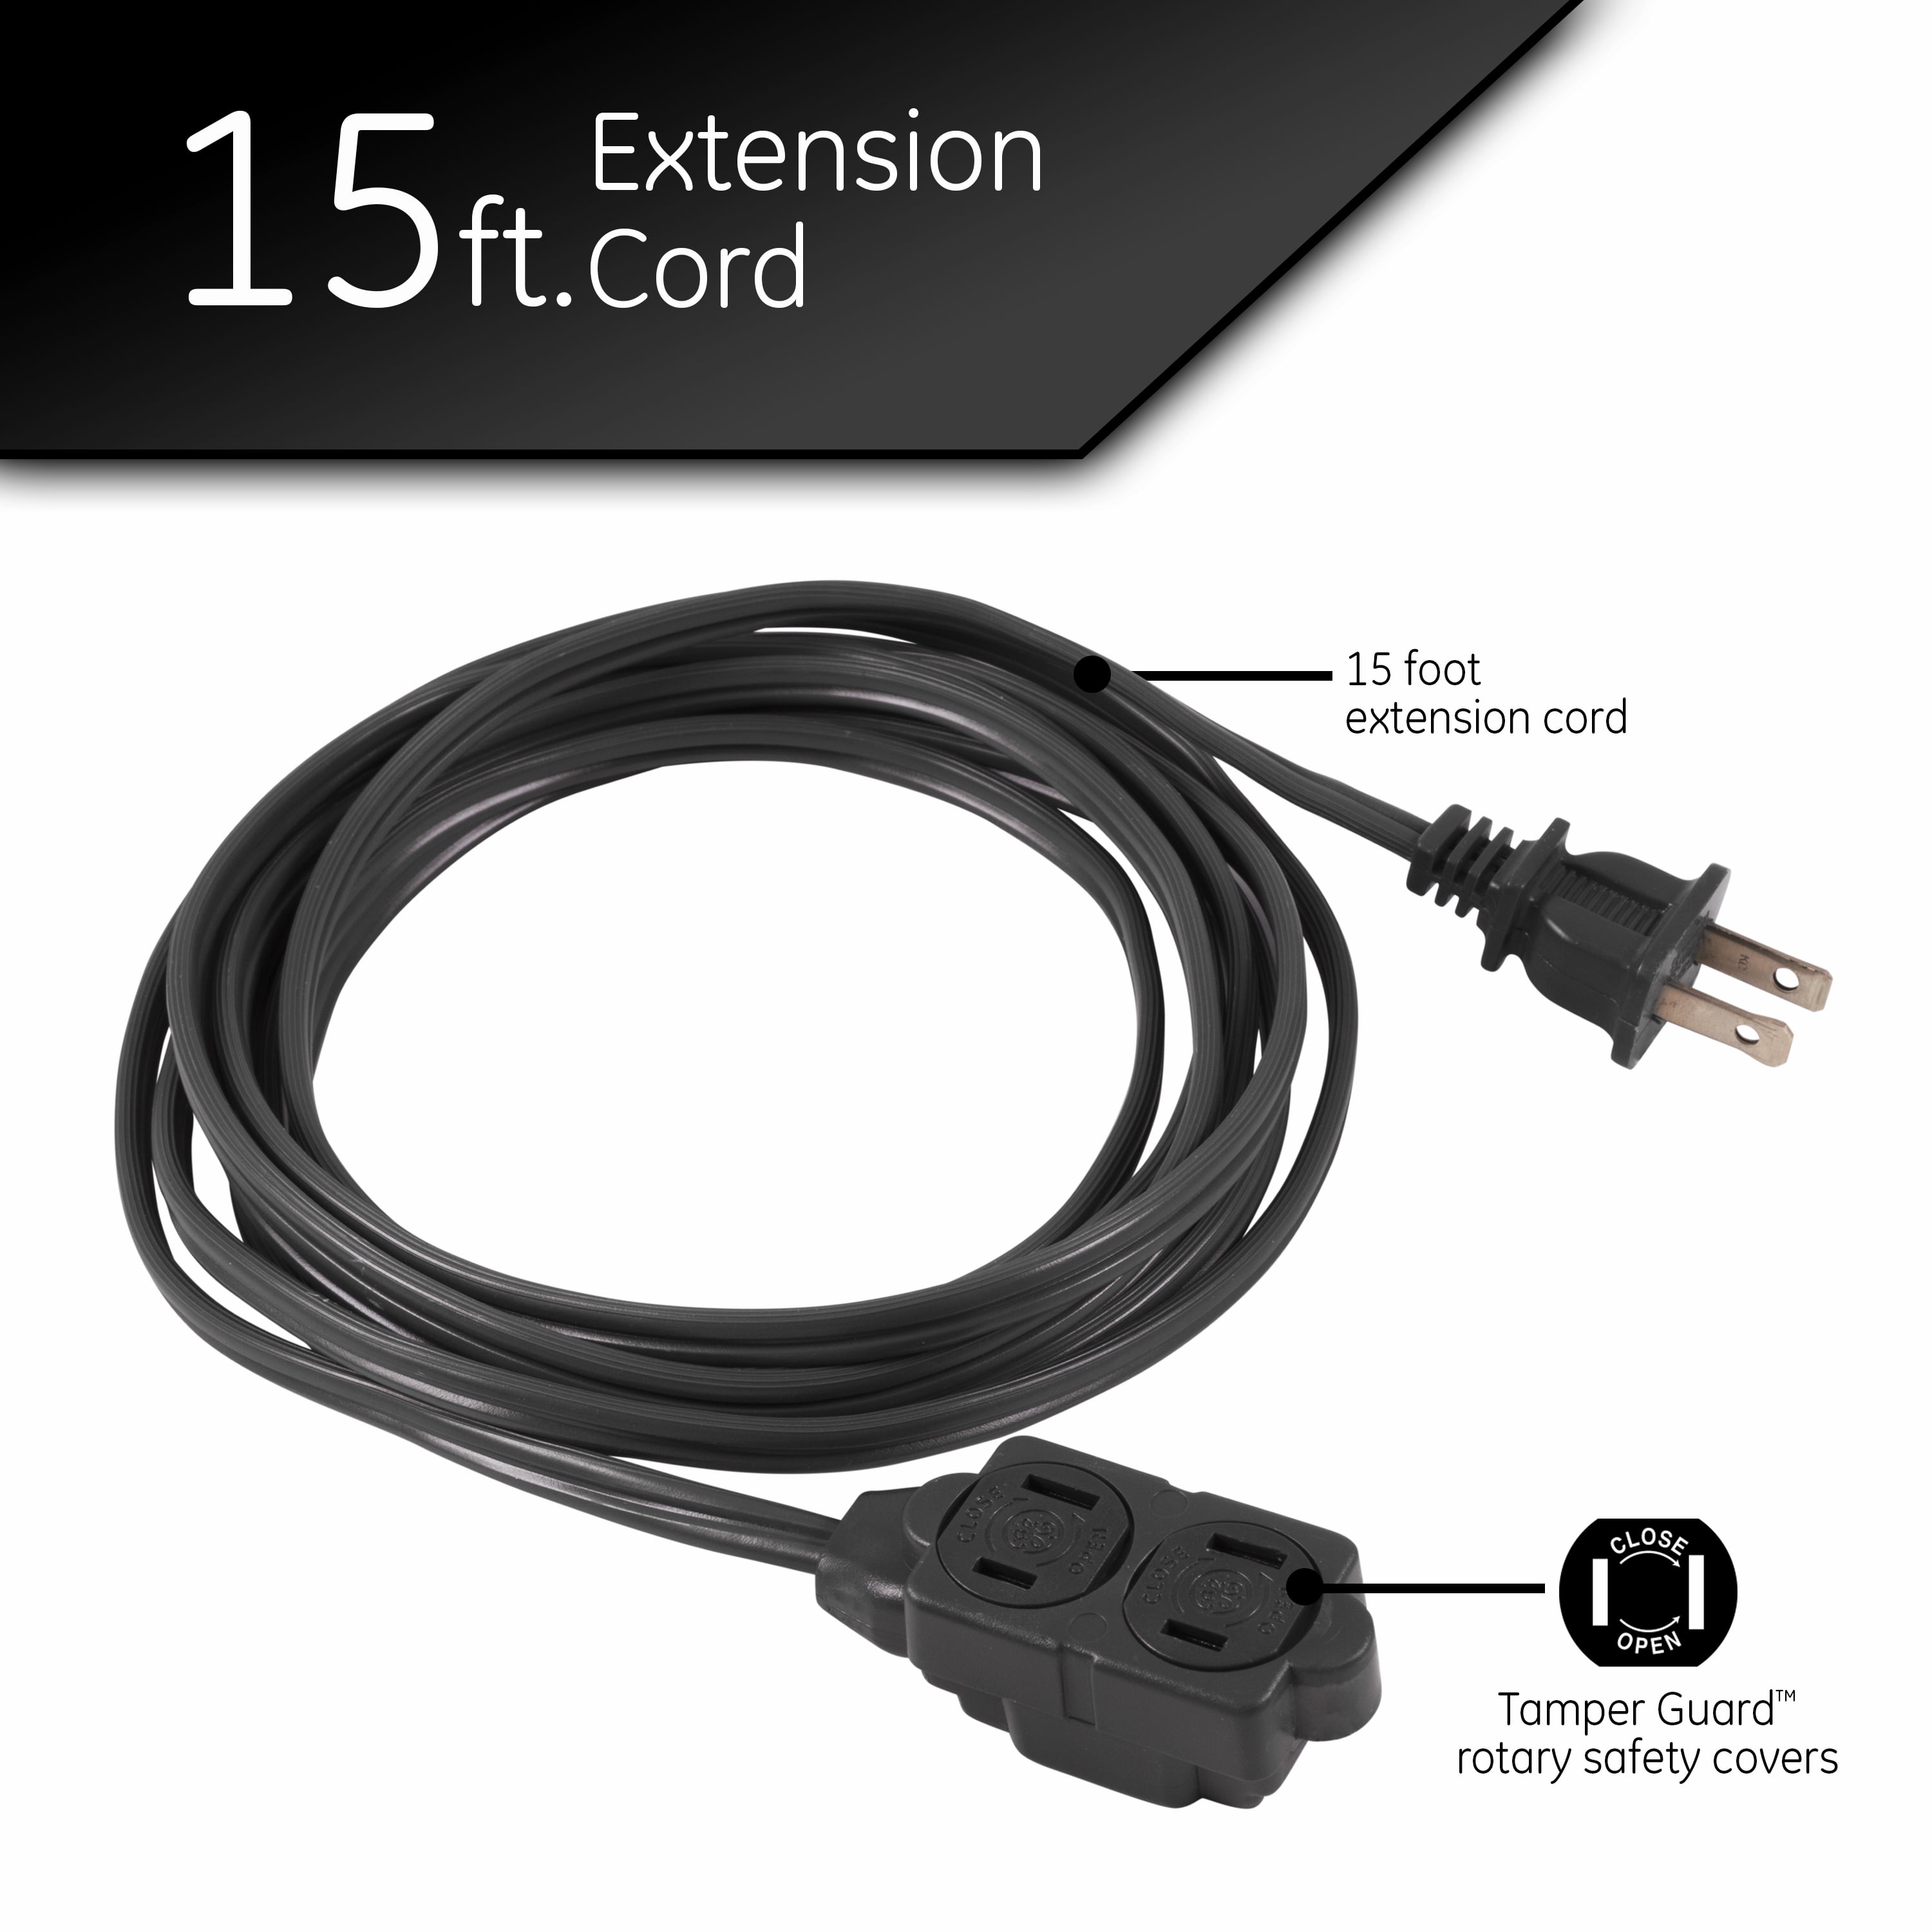 GE Extension Cord, Indoor, White, 9 Feet